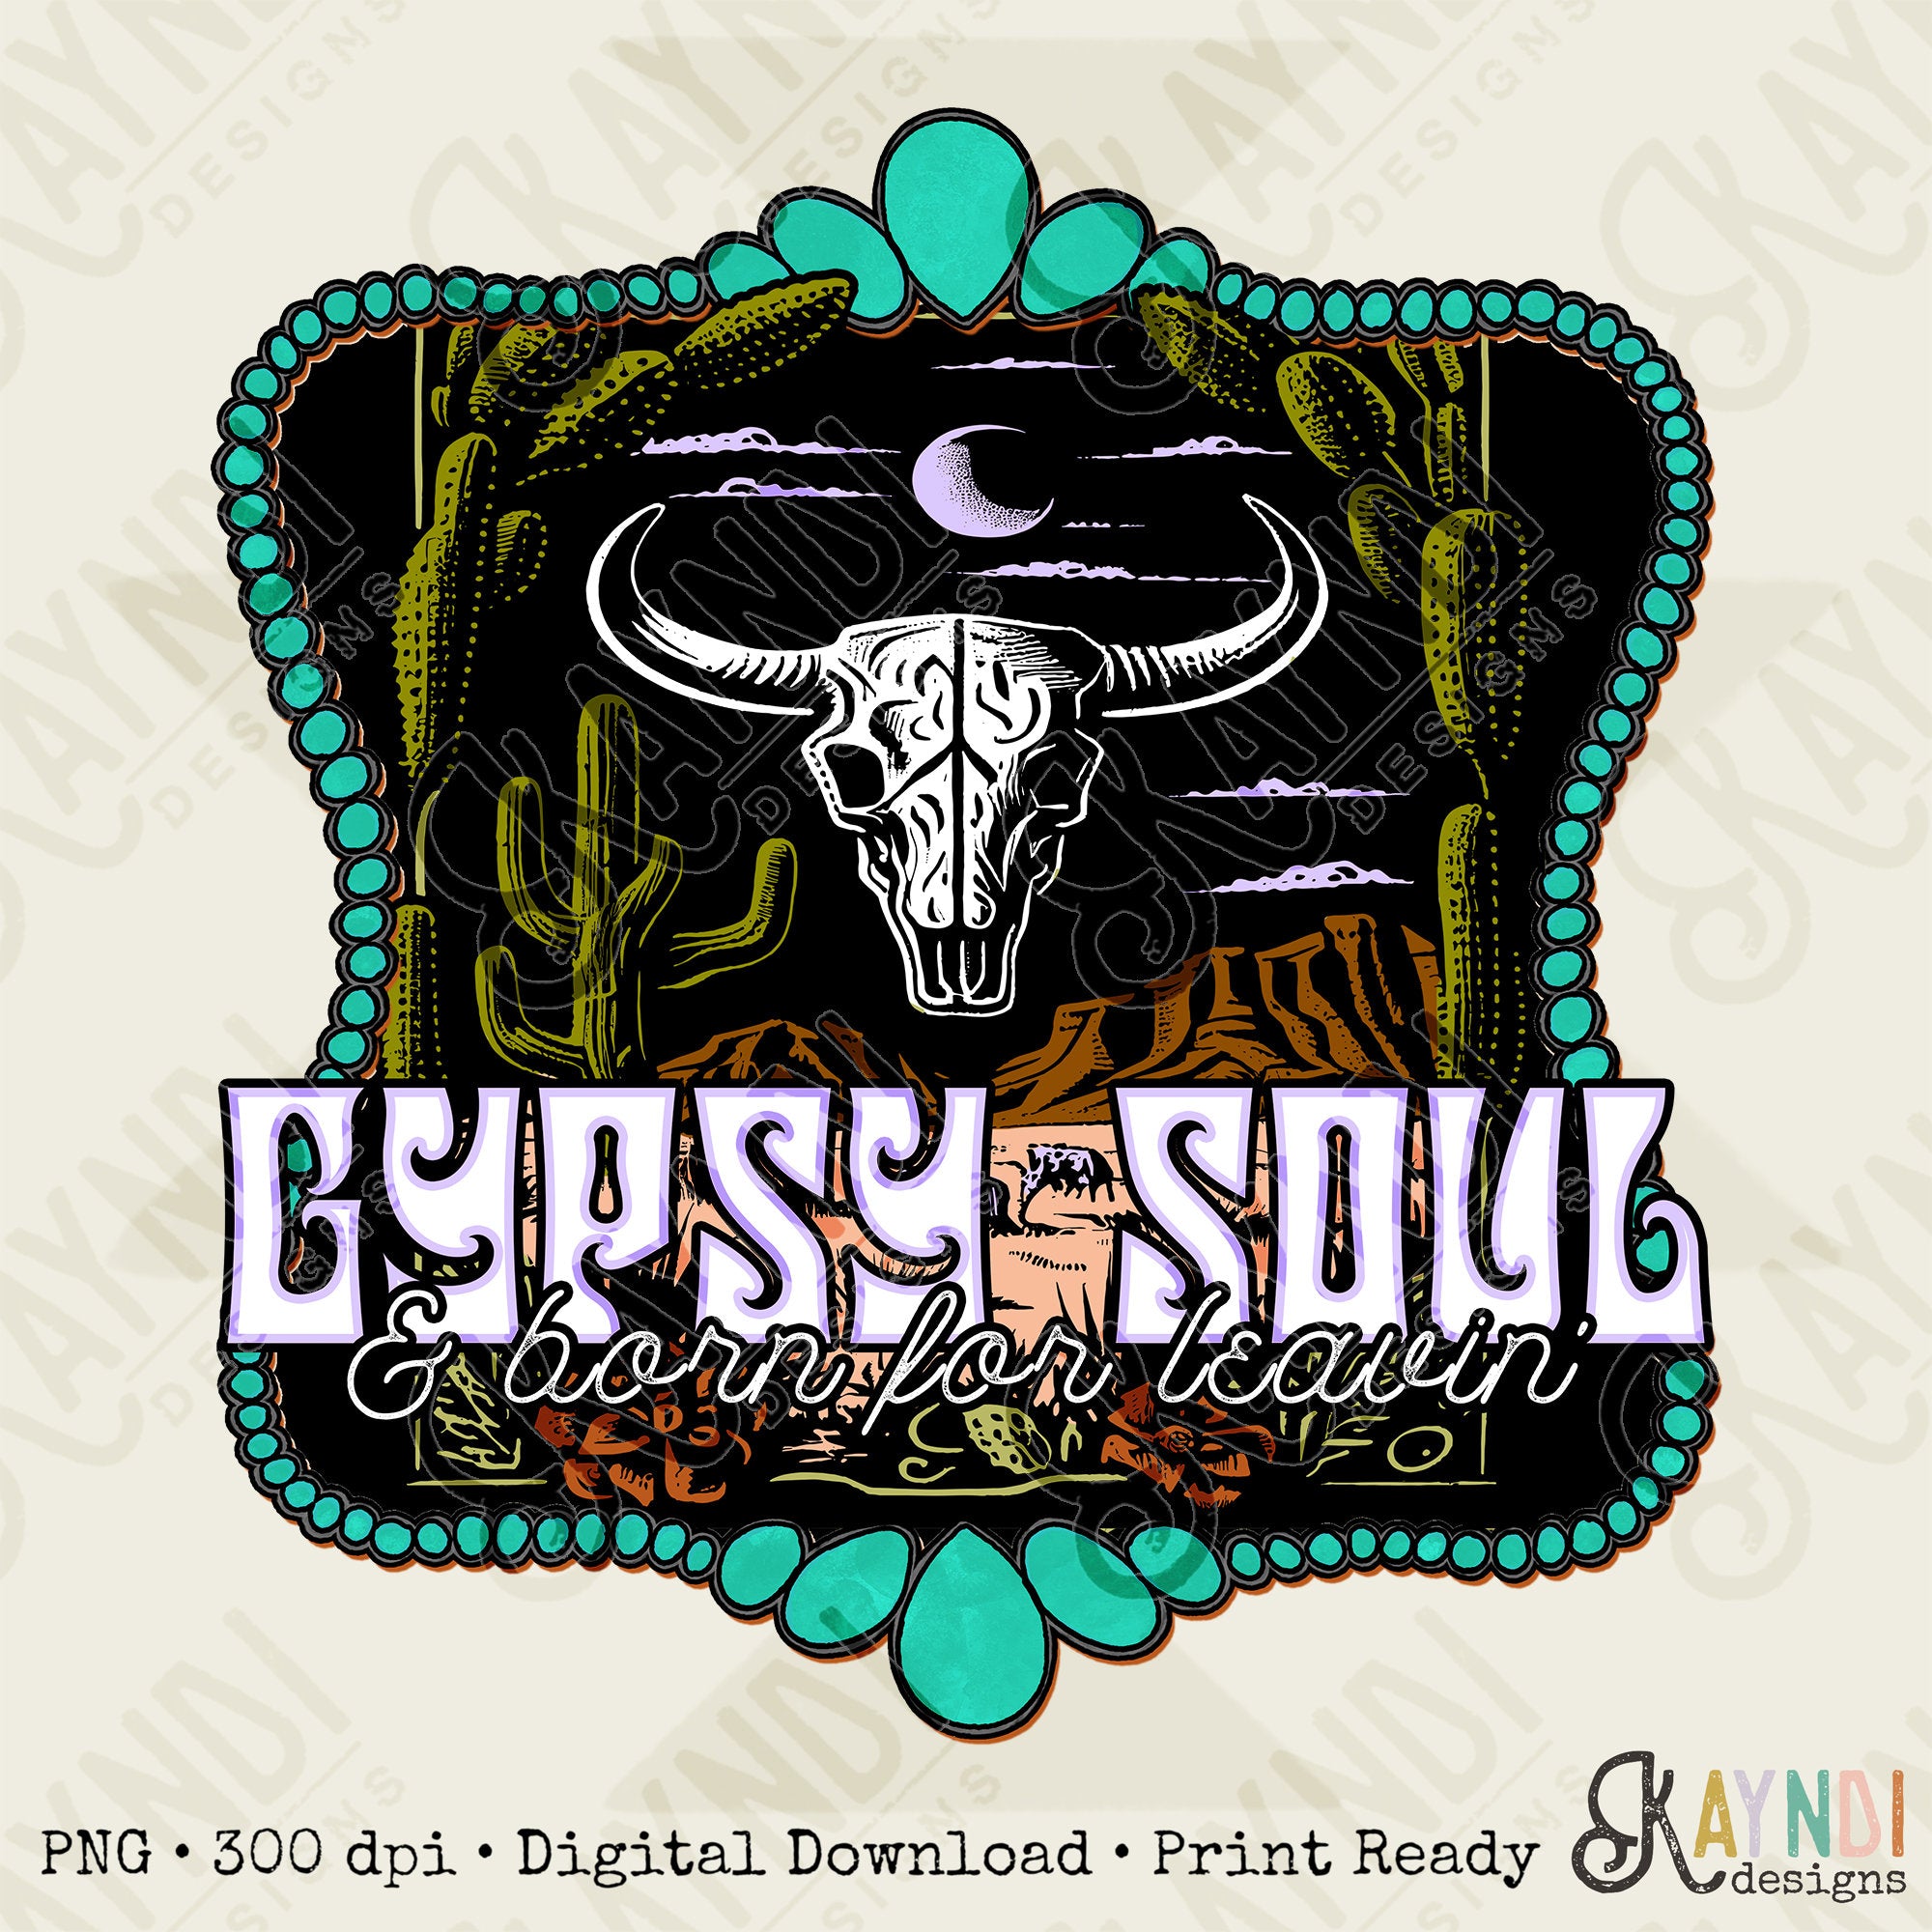 Gypsy Soul And Born For Leavin Sublimation Design PNG Digital Download Printable Steer Skull Desert Turquoise Poncho Cowgirl Western Boho